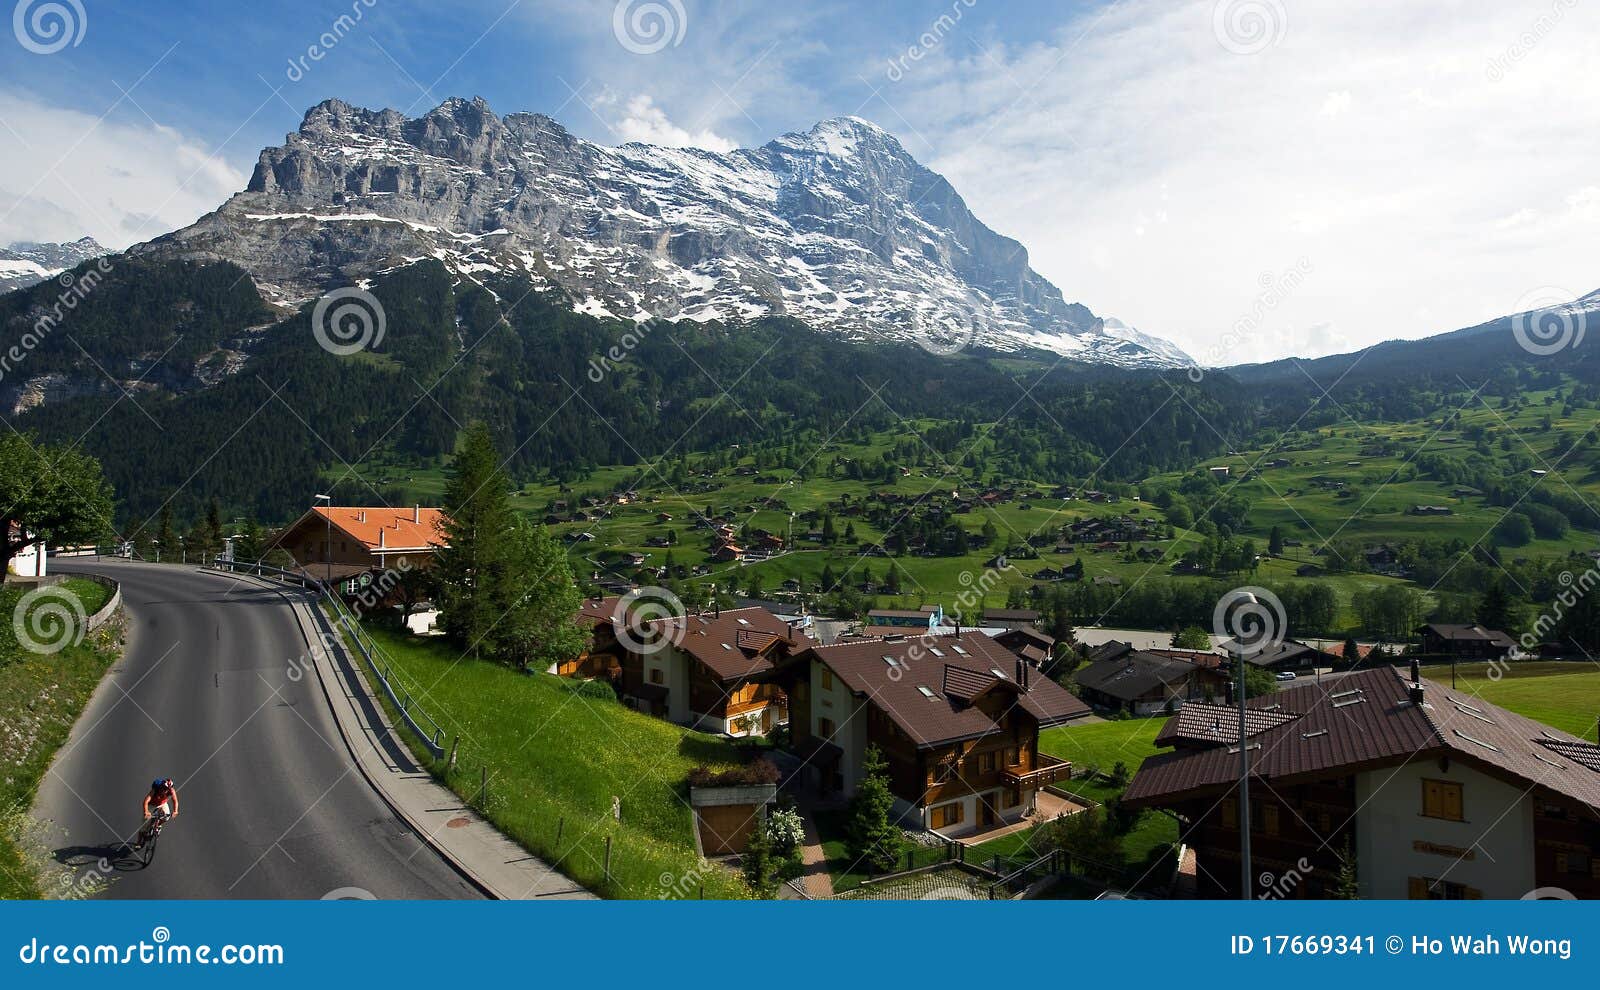 overview of the village at grindelwald